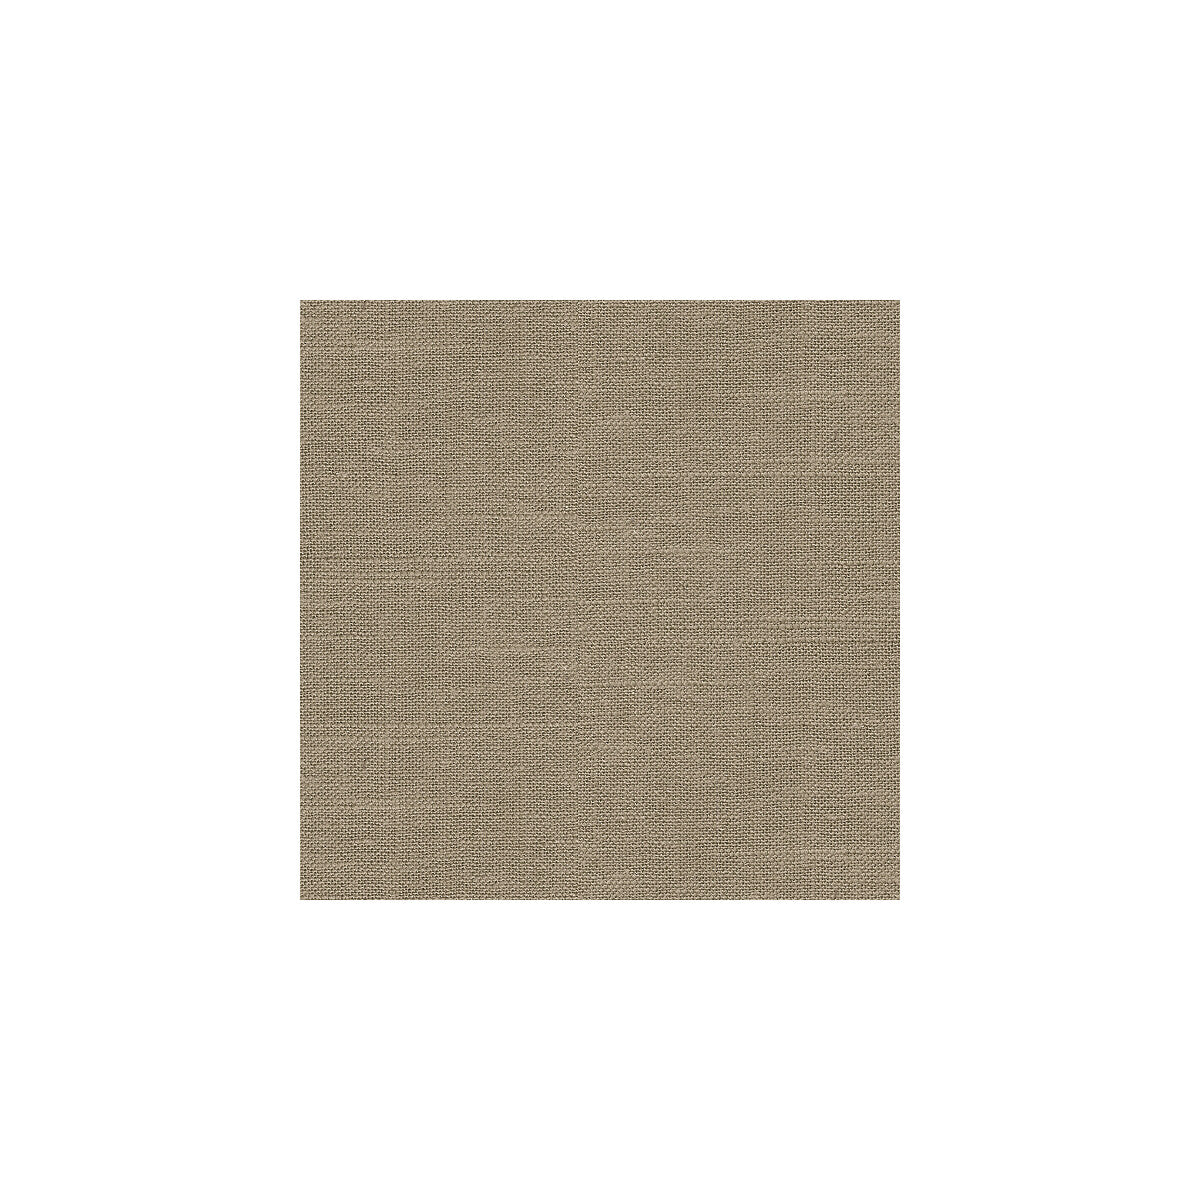 Barnegat fabric in dove color - pattern 24573.1161.0 - by Kravet Basics in the Perfect Plains collection